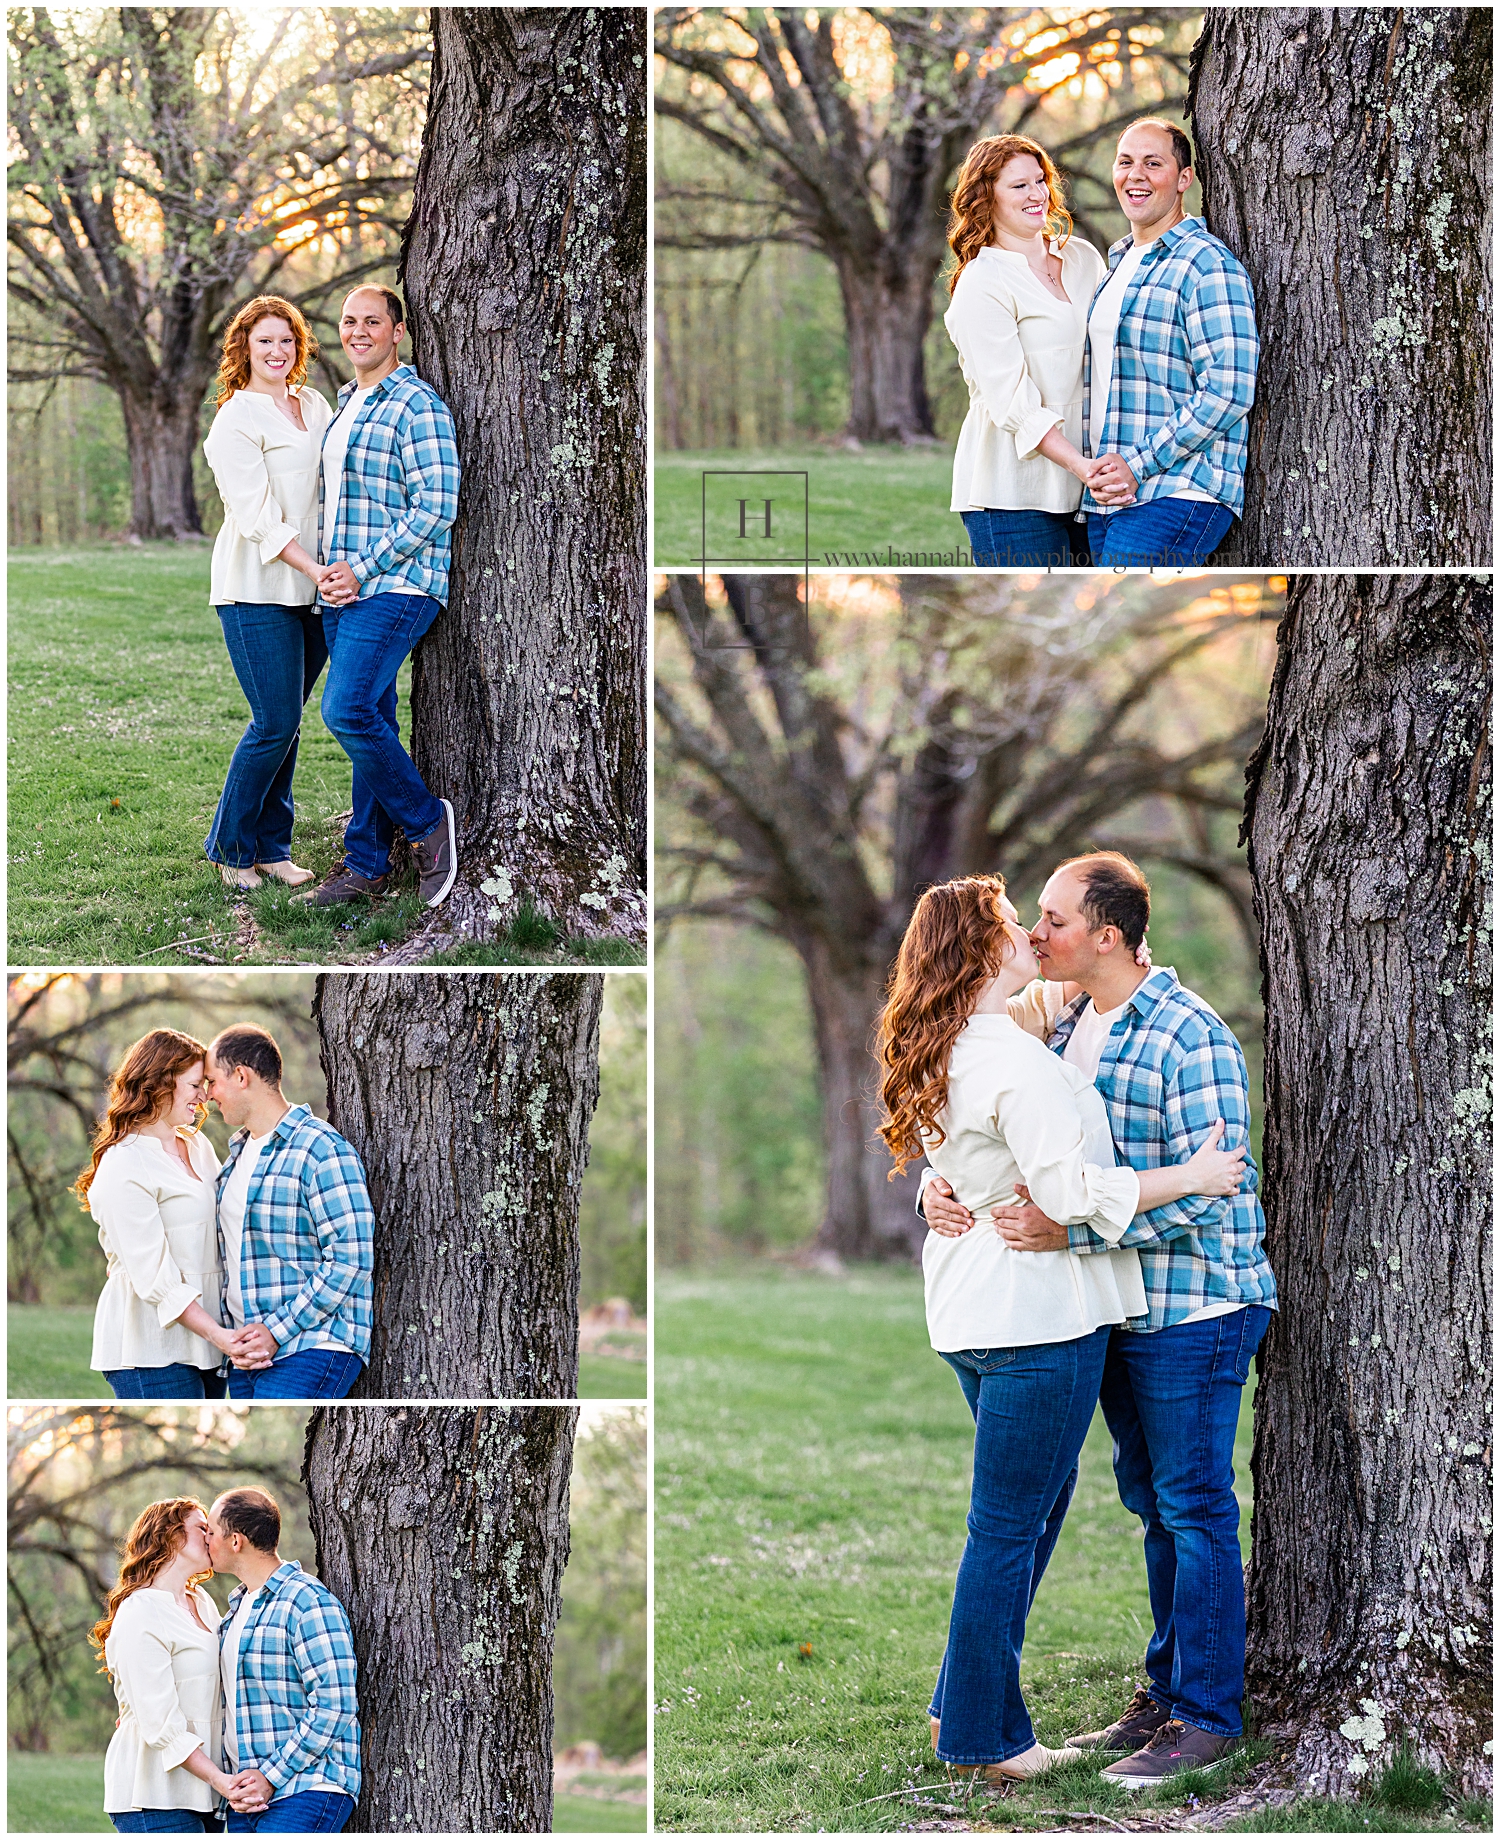 Couple poses for engagement session during golden hour with man leaning against tree.